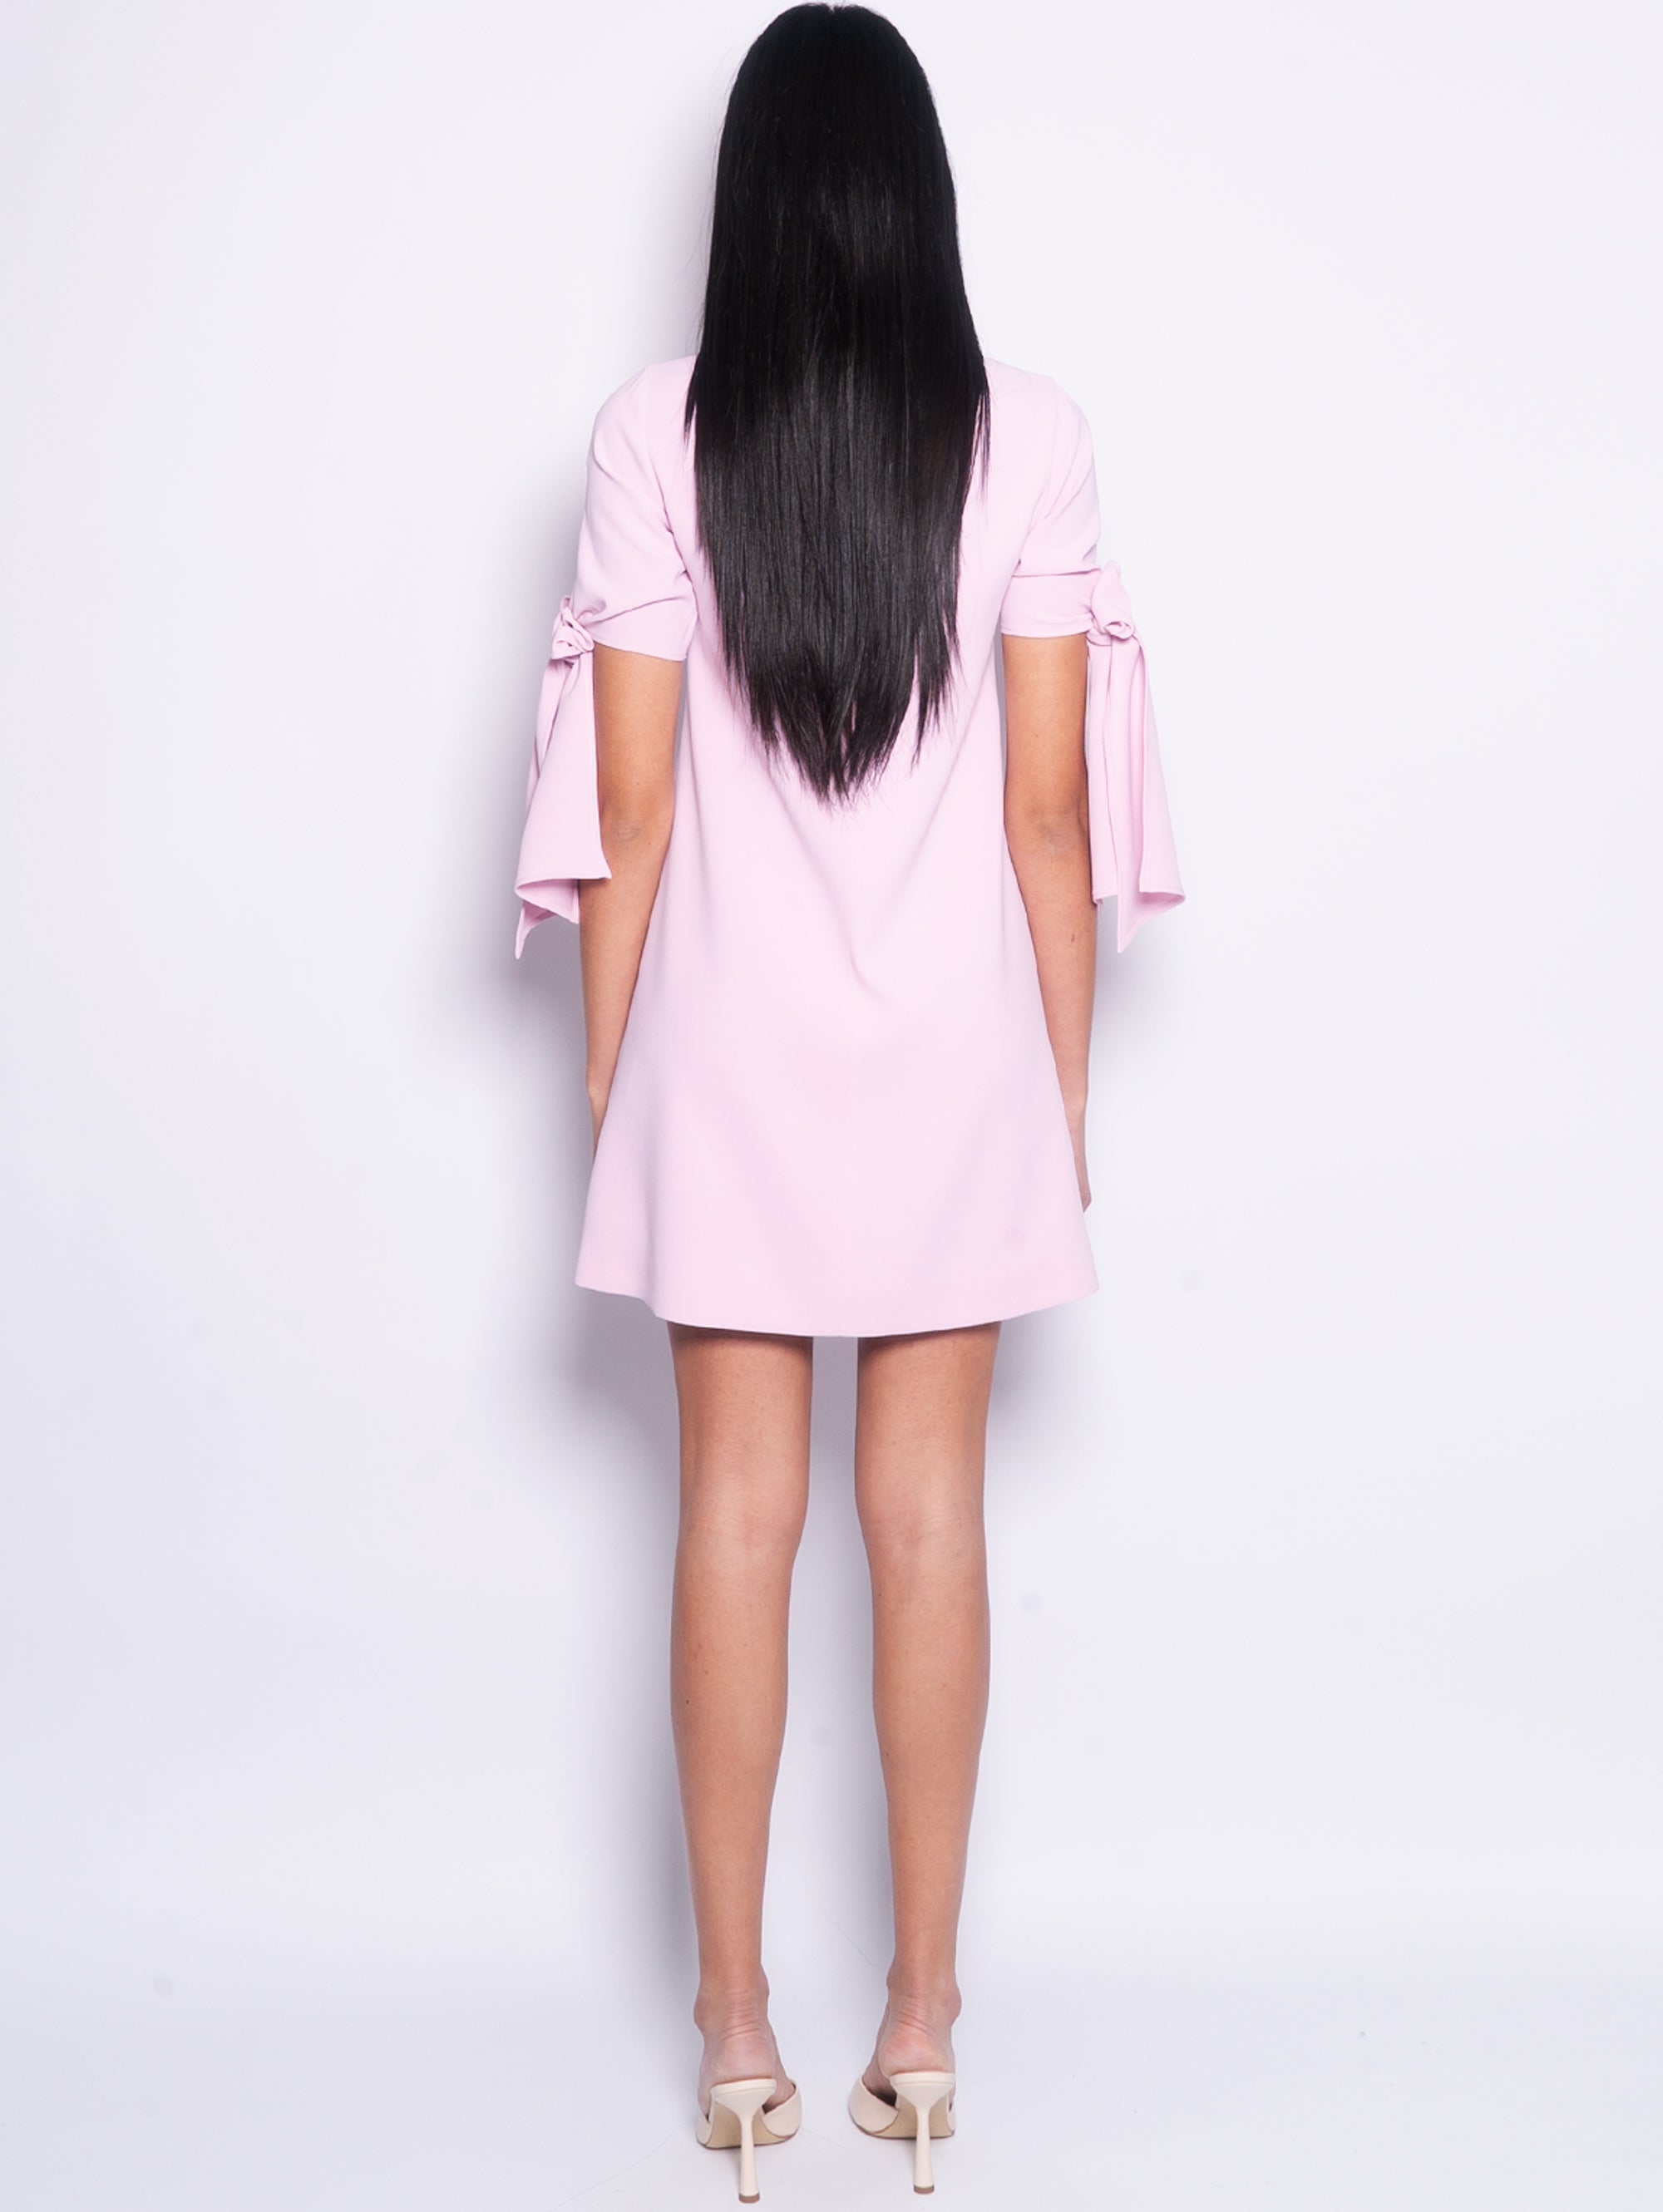 Short dress with bow on the pink sleeves